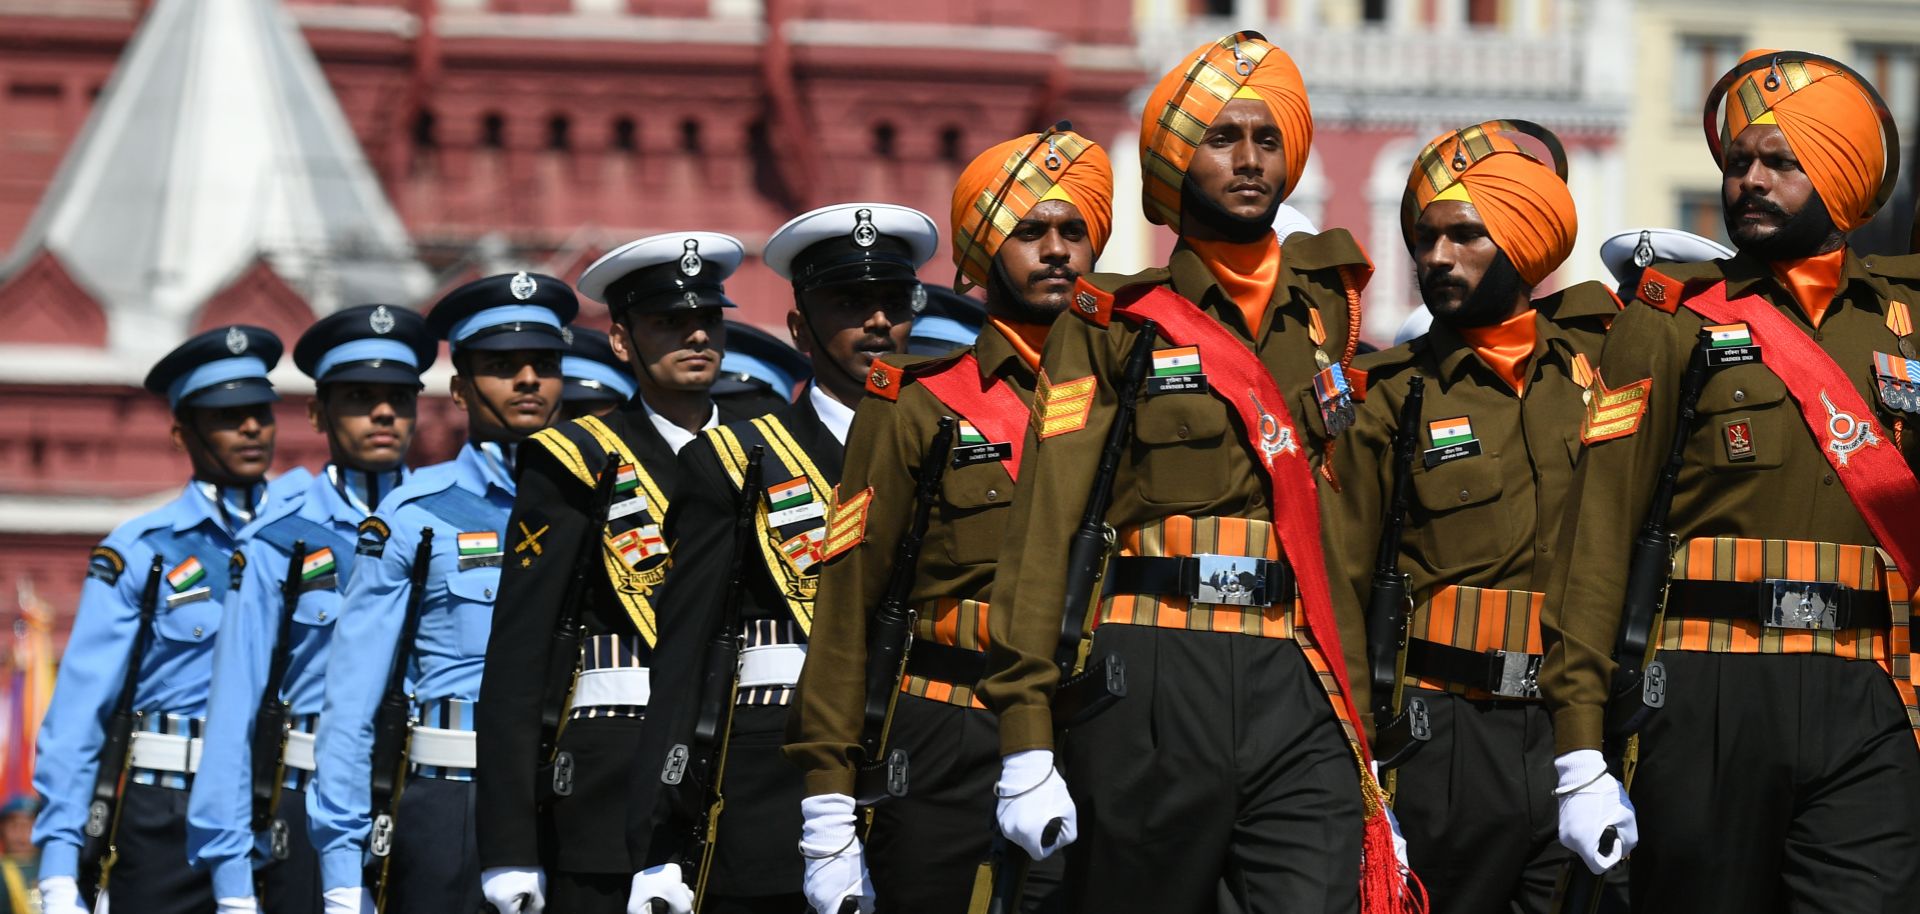 Members of India’s armed forces march in a military parade in Moscow's historic Red Square on June 24, 2020, to commemorate the 75th anniversary of the Soviet Union’s victory in World War II. 